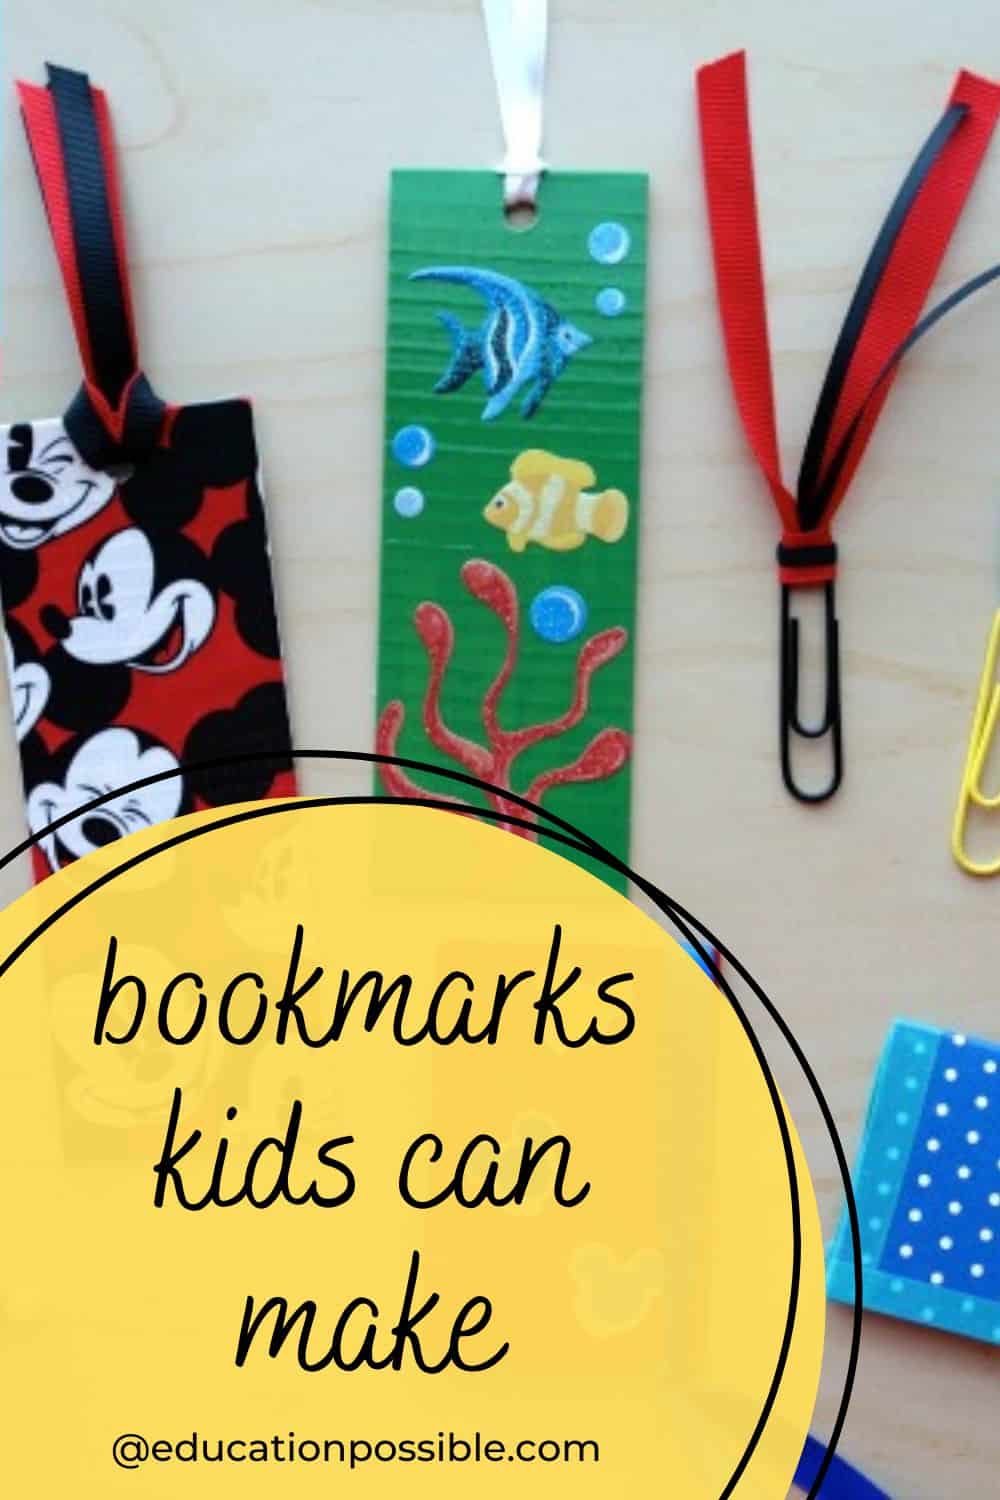 DIY Bookmarks Kids Can Make for Their Friends